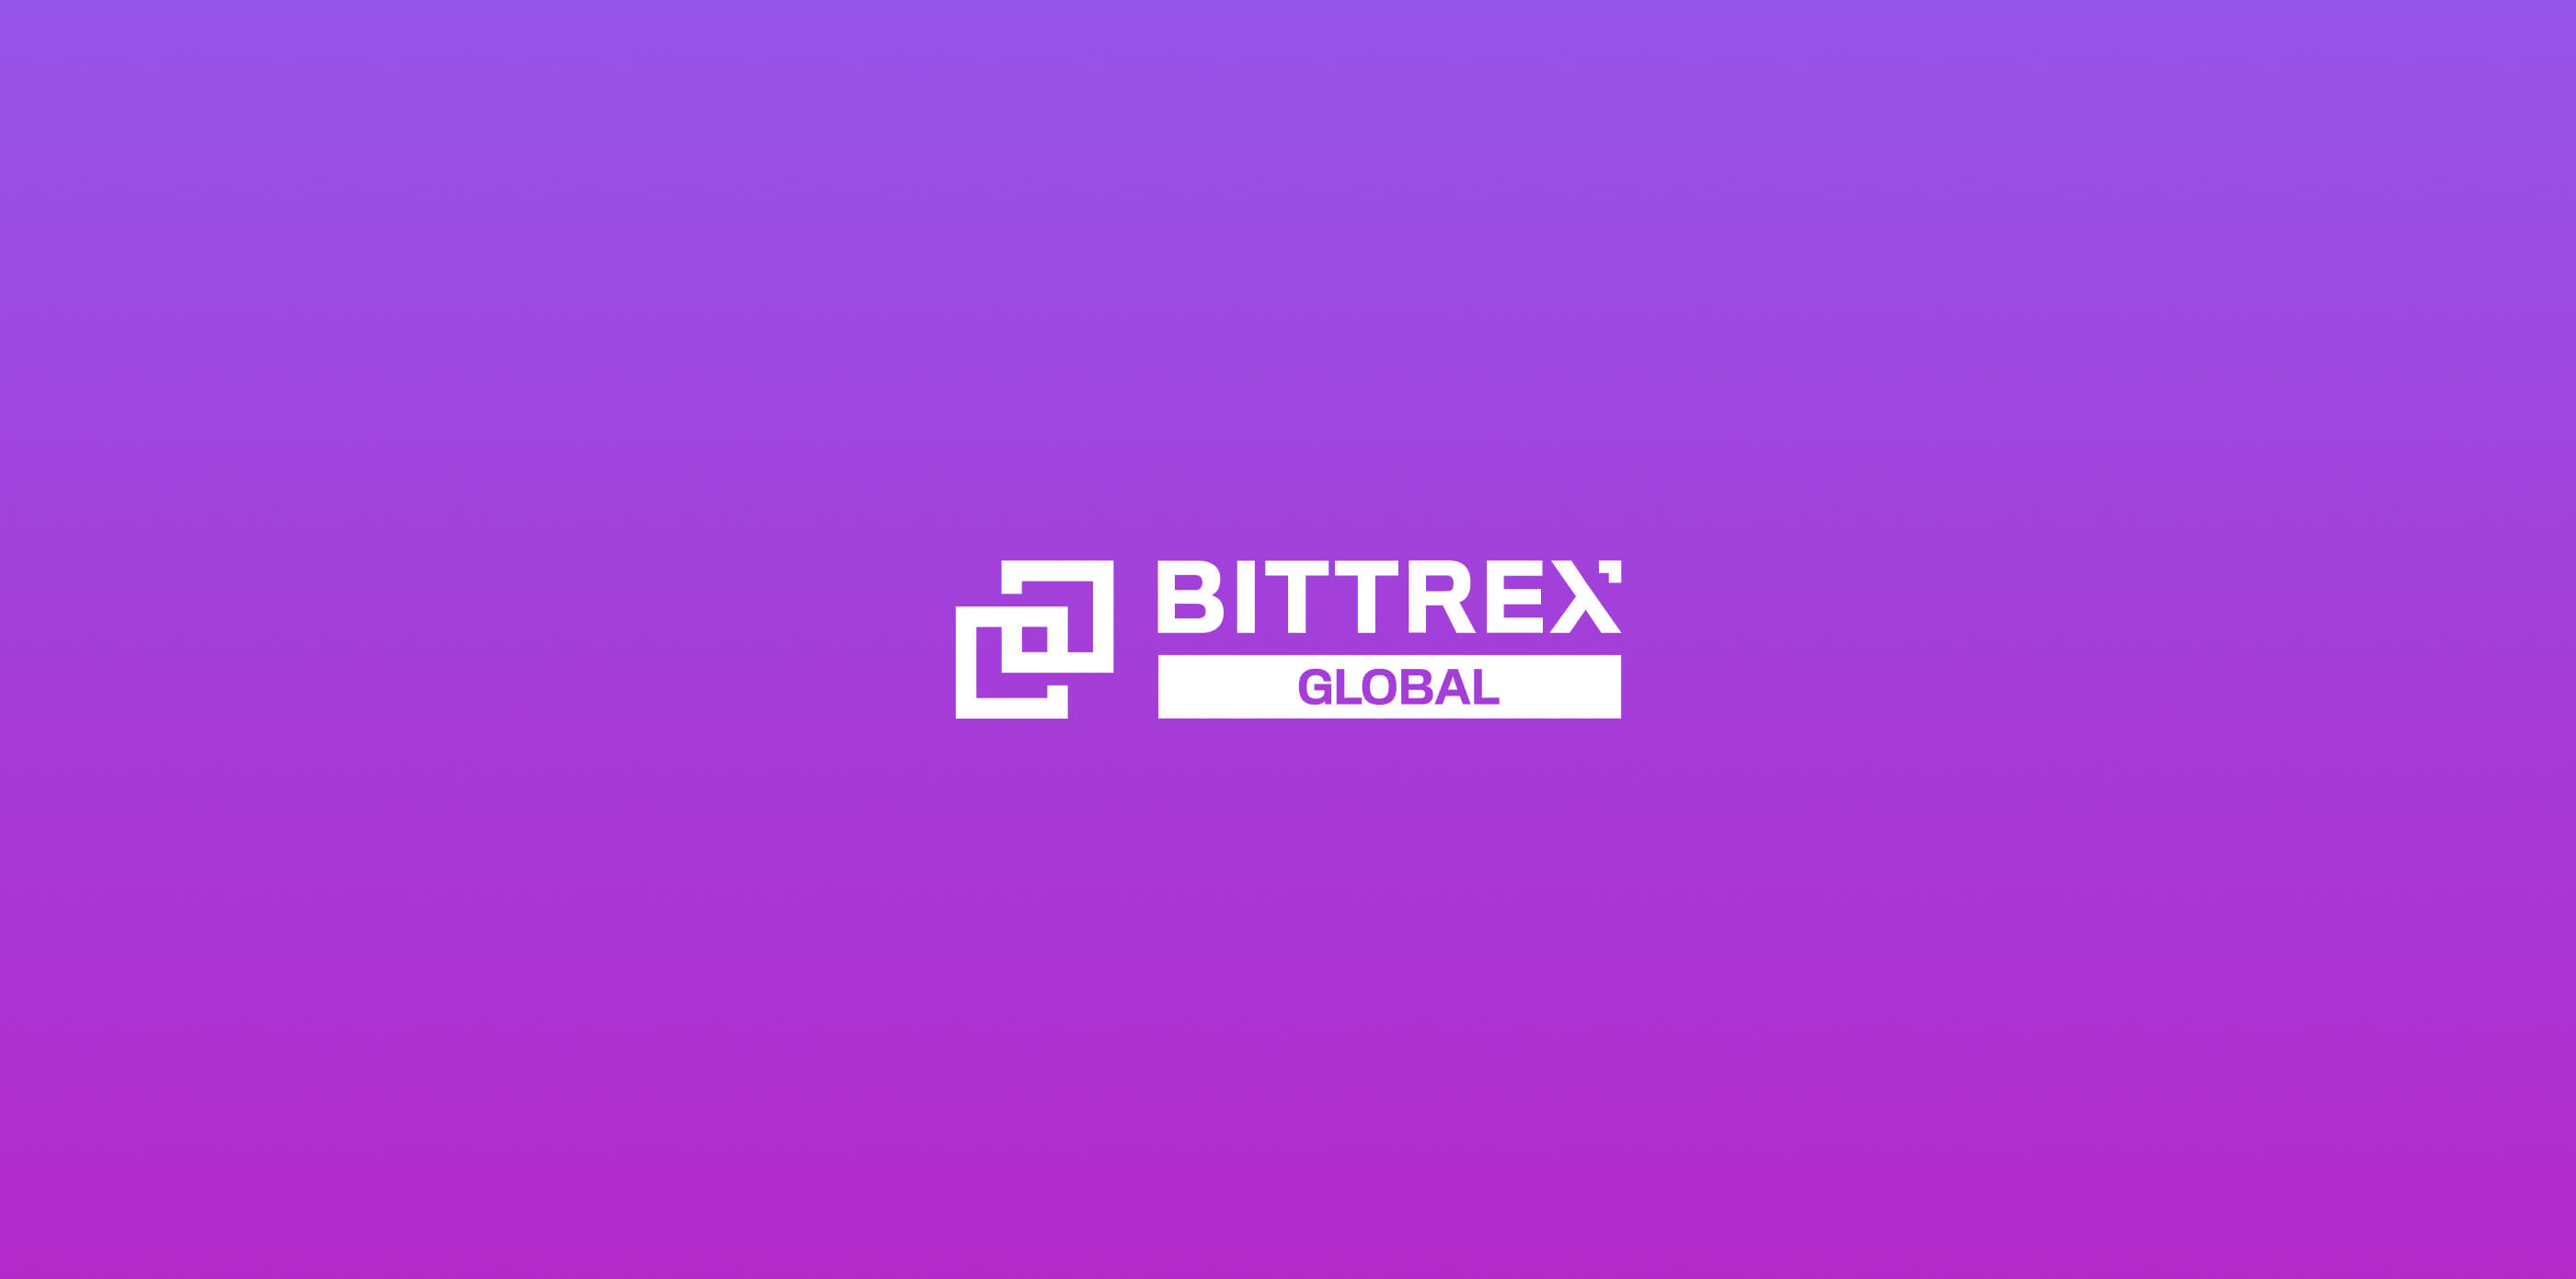 US Bankruptcy Court Approves Crypto Exchange Bittrex's Shut Down